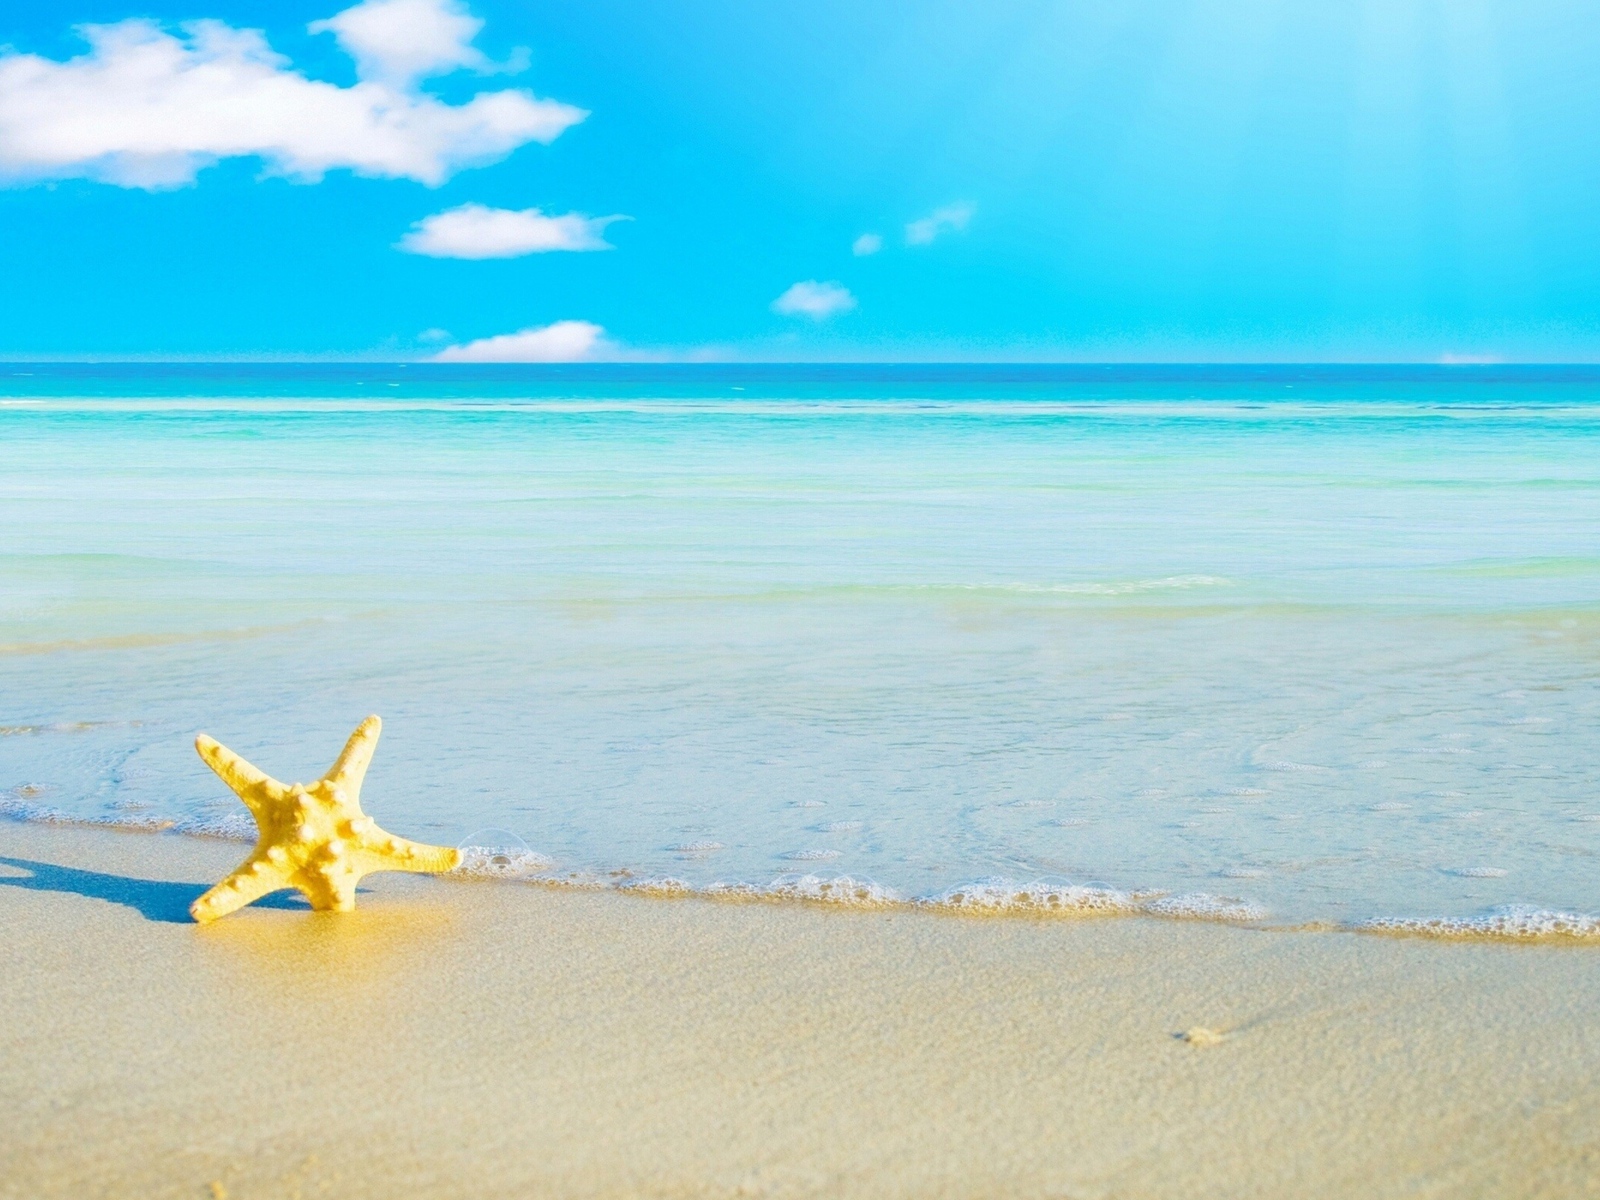 Starfish on white sand by the sea under blue sky